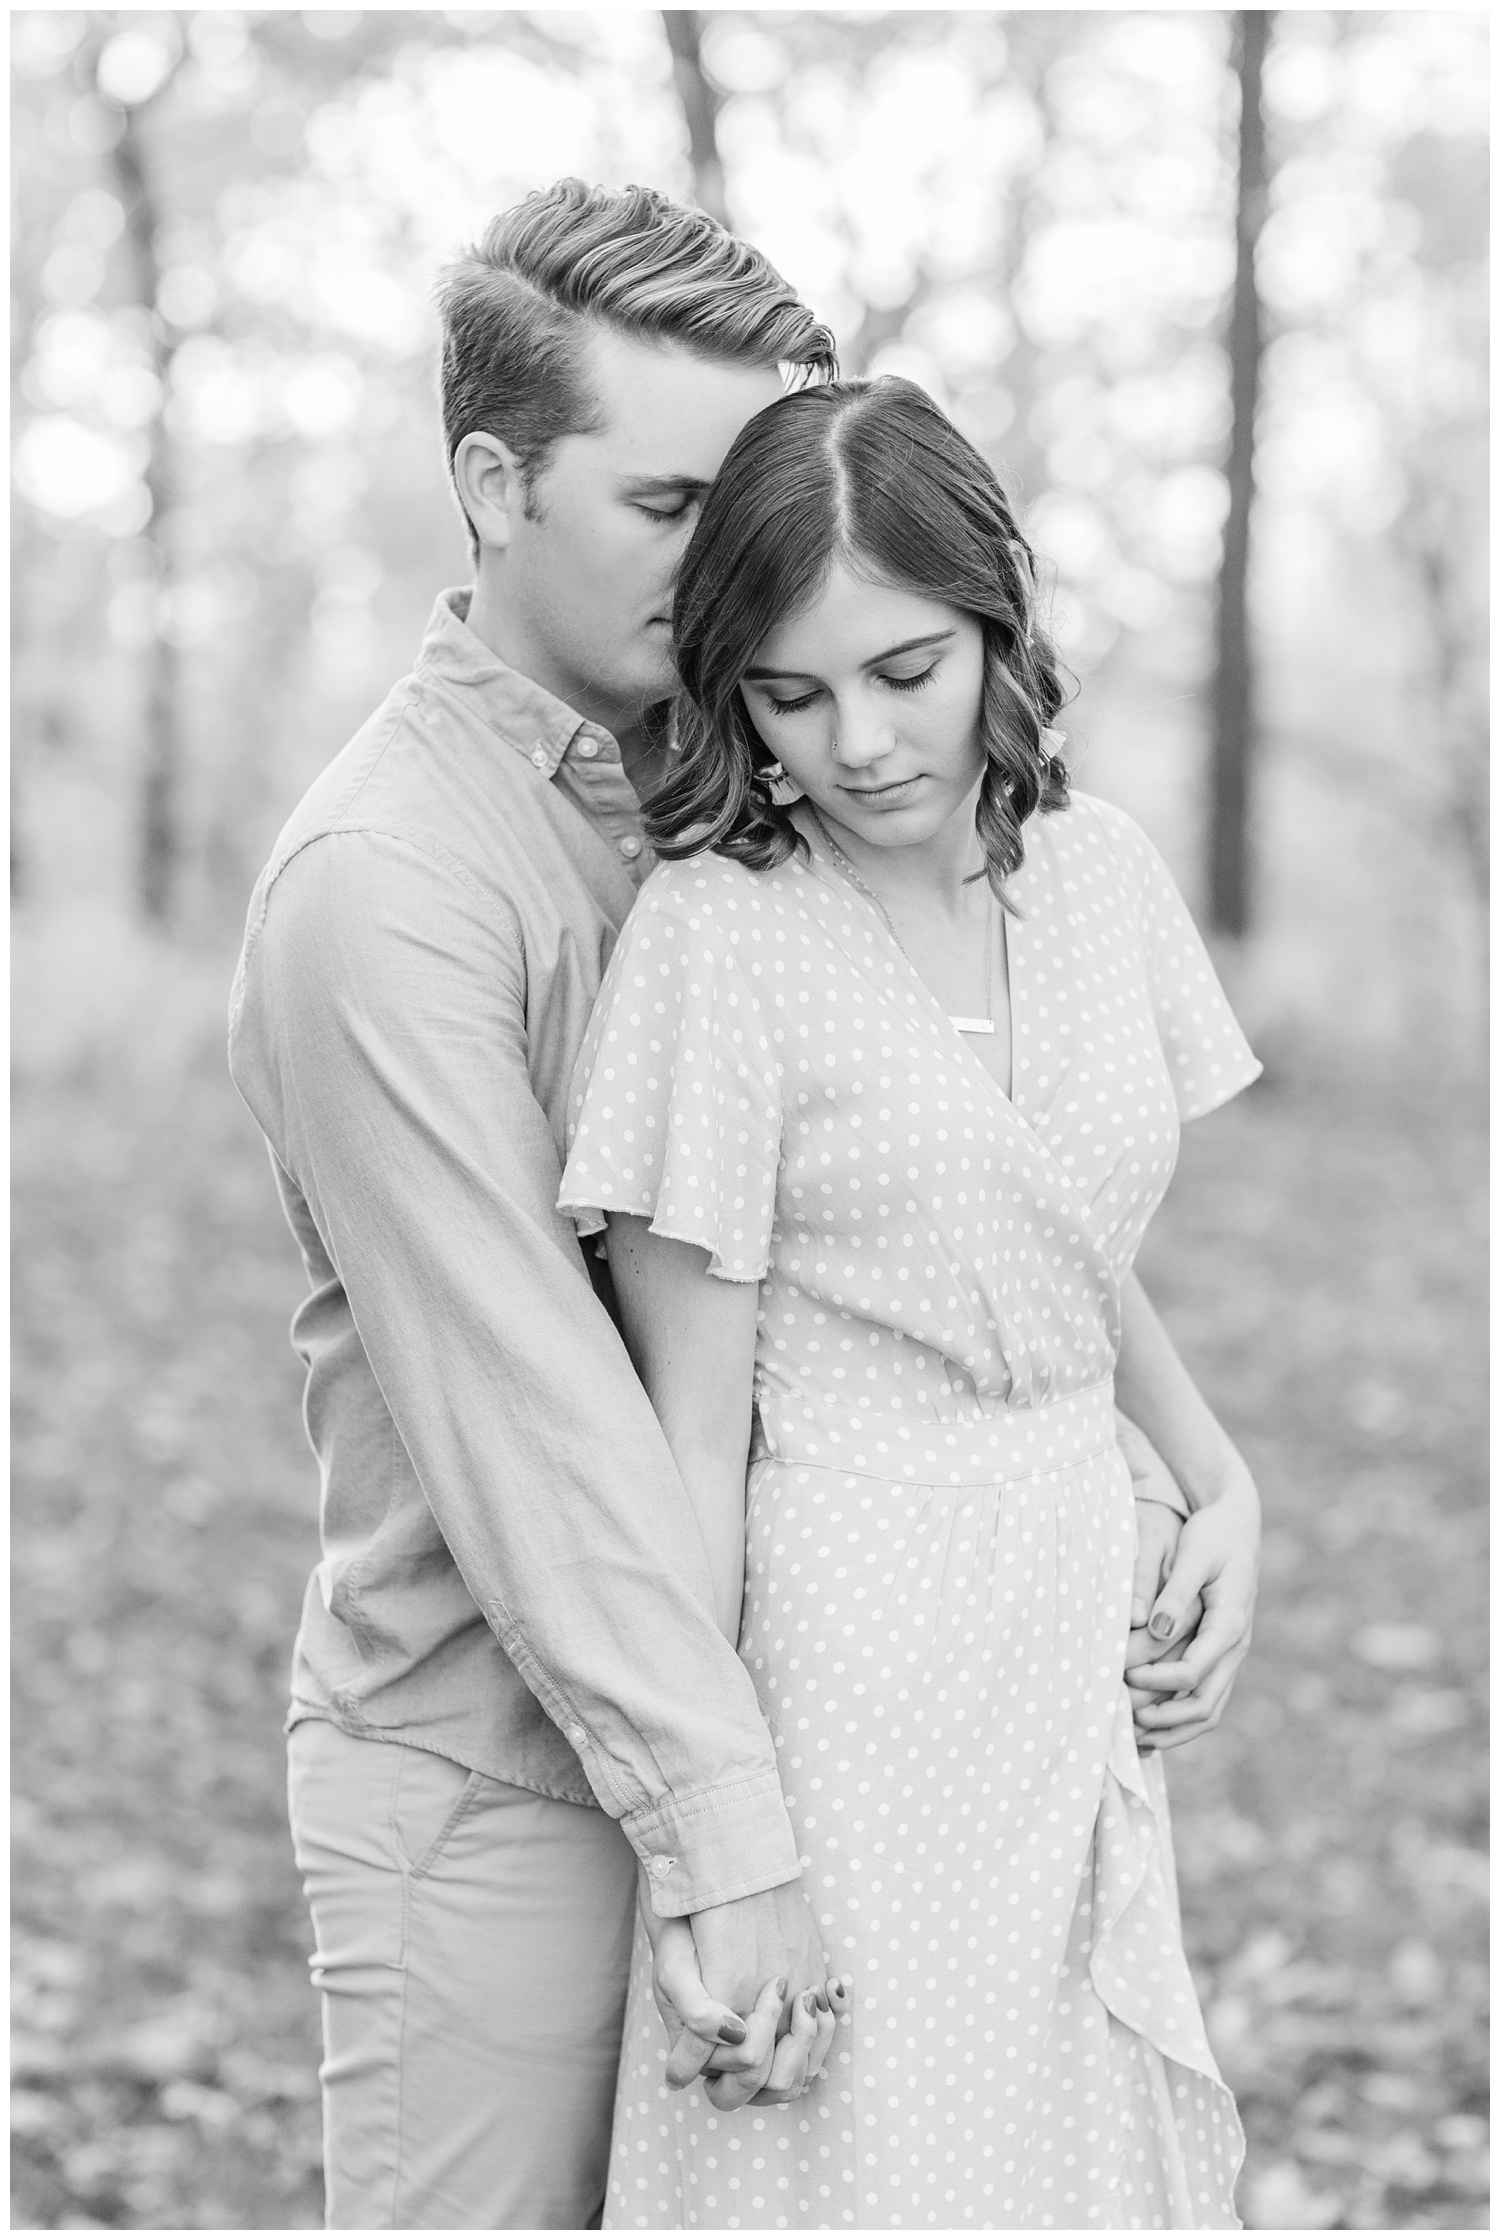 Jadi wearing a yellow flowing dress lovingly looks down as Luke whispers into her ear while embracing together in a grassy field in Iowa during the fall for engagement photos | CB Studio